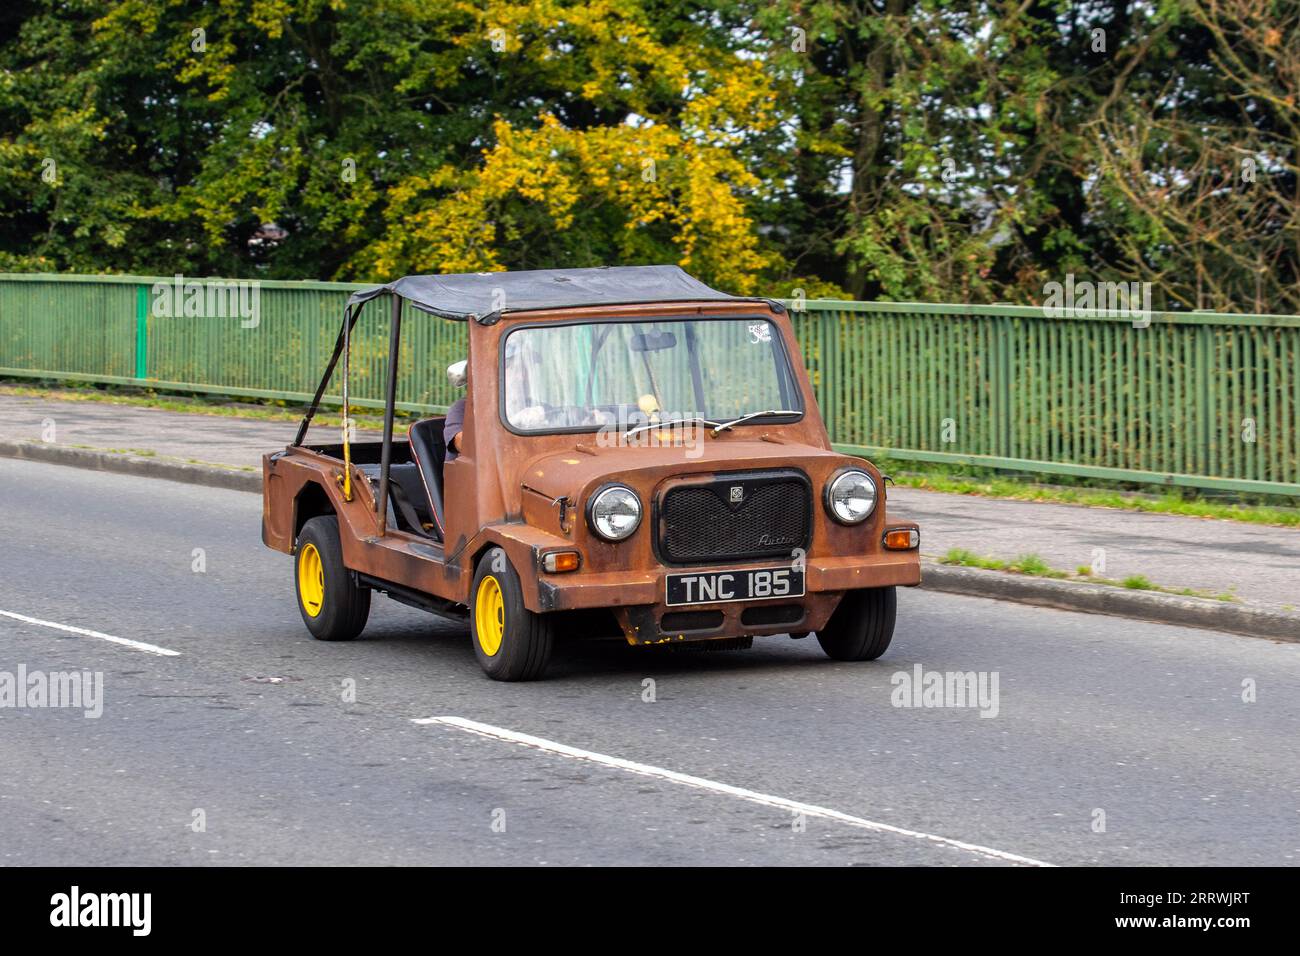 1960s Austin Mini Moke Style dilapidated brown open vehicle, a small, front-wheel-drive utility and recreational convertible. Front-engine, front-wheel drive, 850cc, four cylinders,45bhp British Classic. Stock Photo